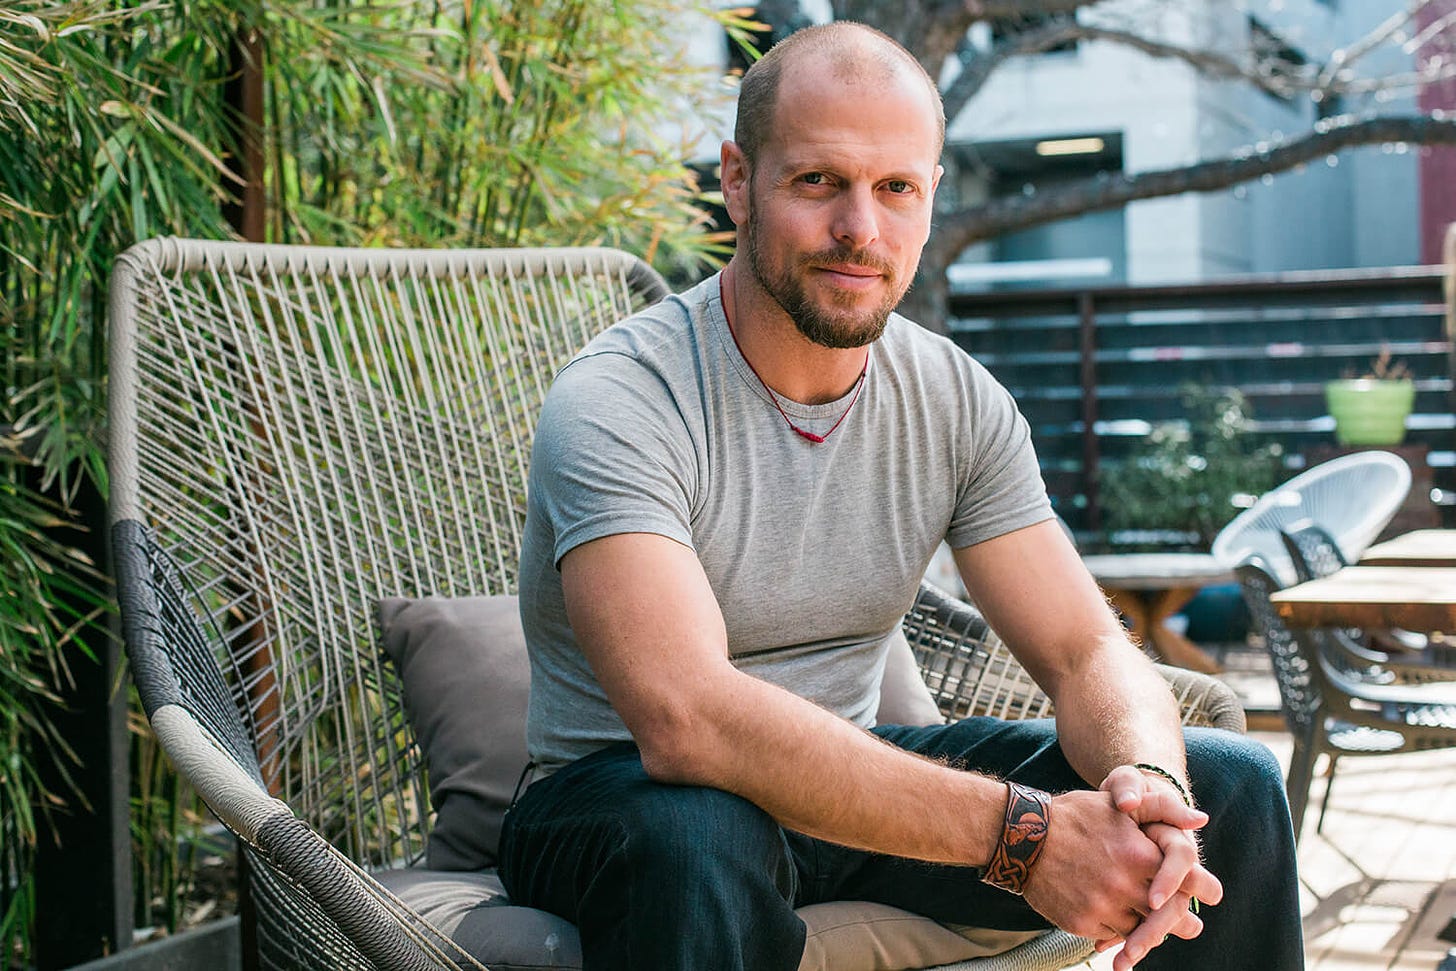 The Blog of Author Tim Ferriss – Tim Ferriss's 4-Hour Workweek and  Lifestyle Design Blog. Tim is an author of 5 #1 NYT/WSJ bestsellers,  investor (FB, Uber, Twitter, 50+ more), and host